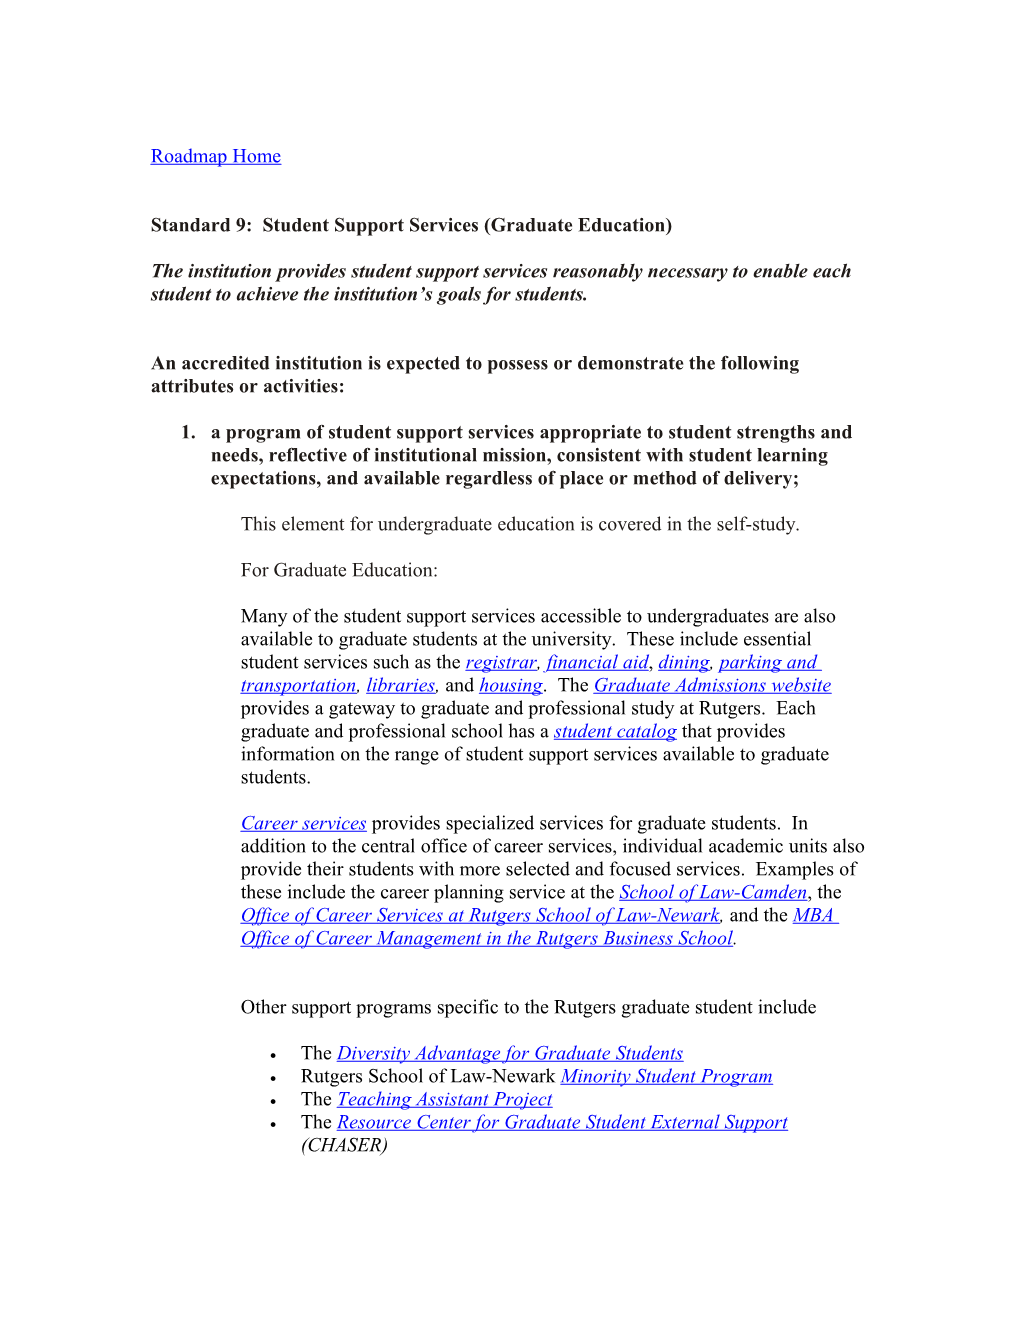 Standard 9: Student Support Services (Graduate Education)